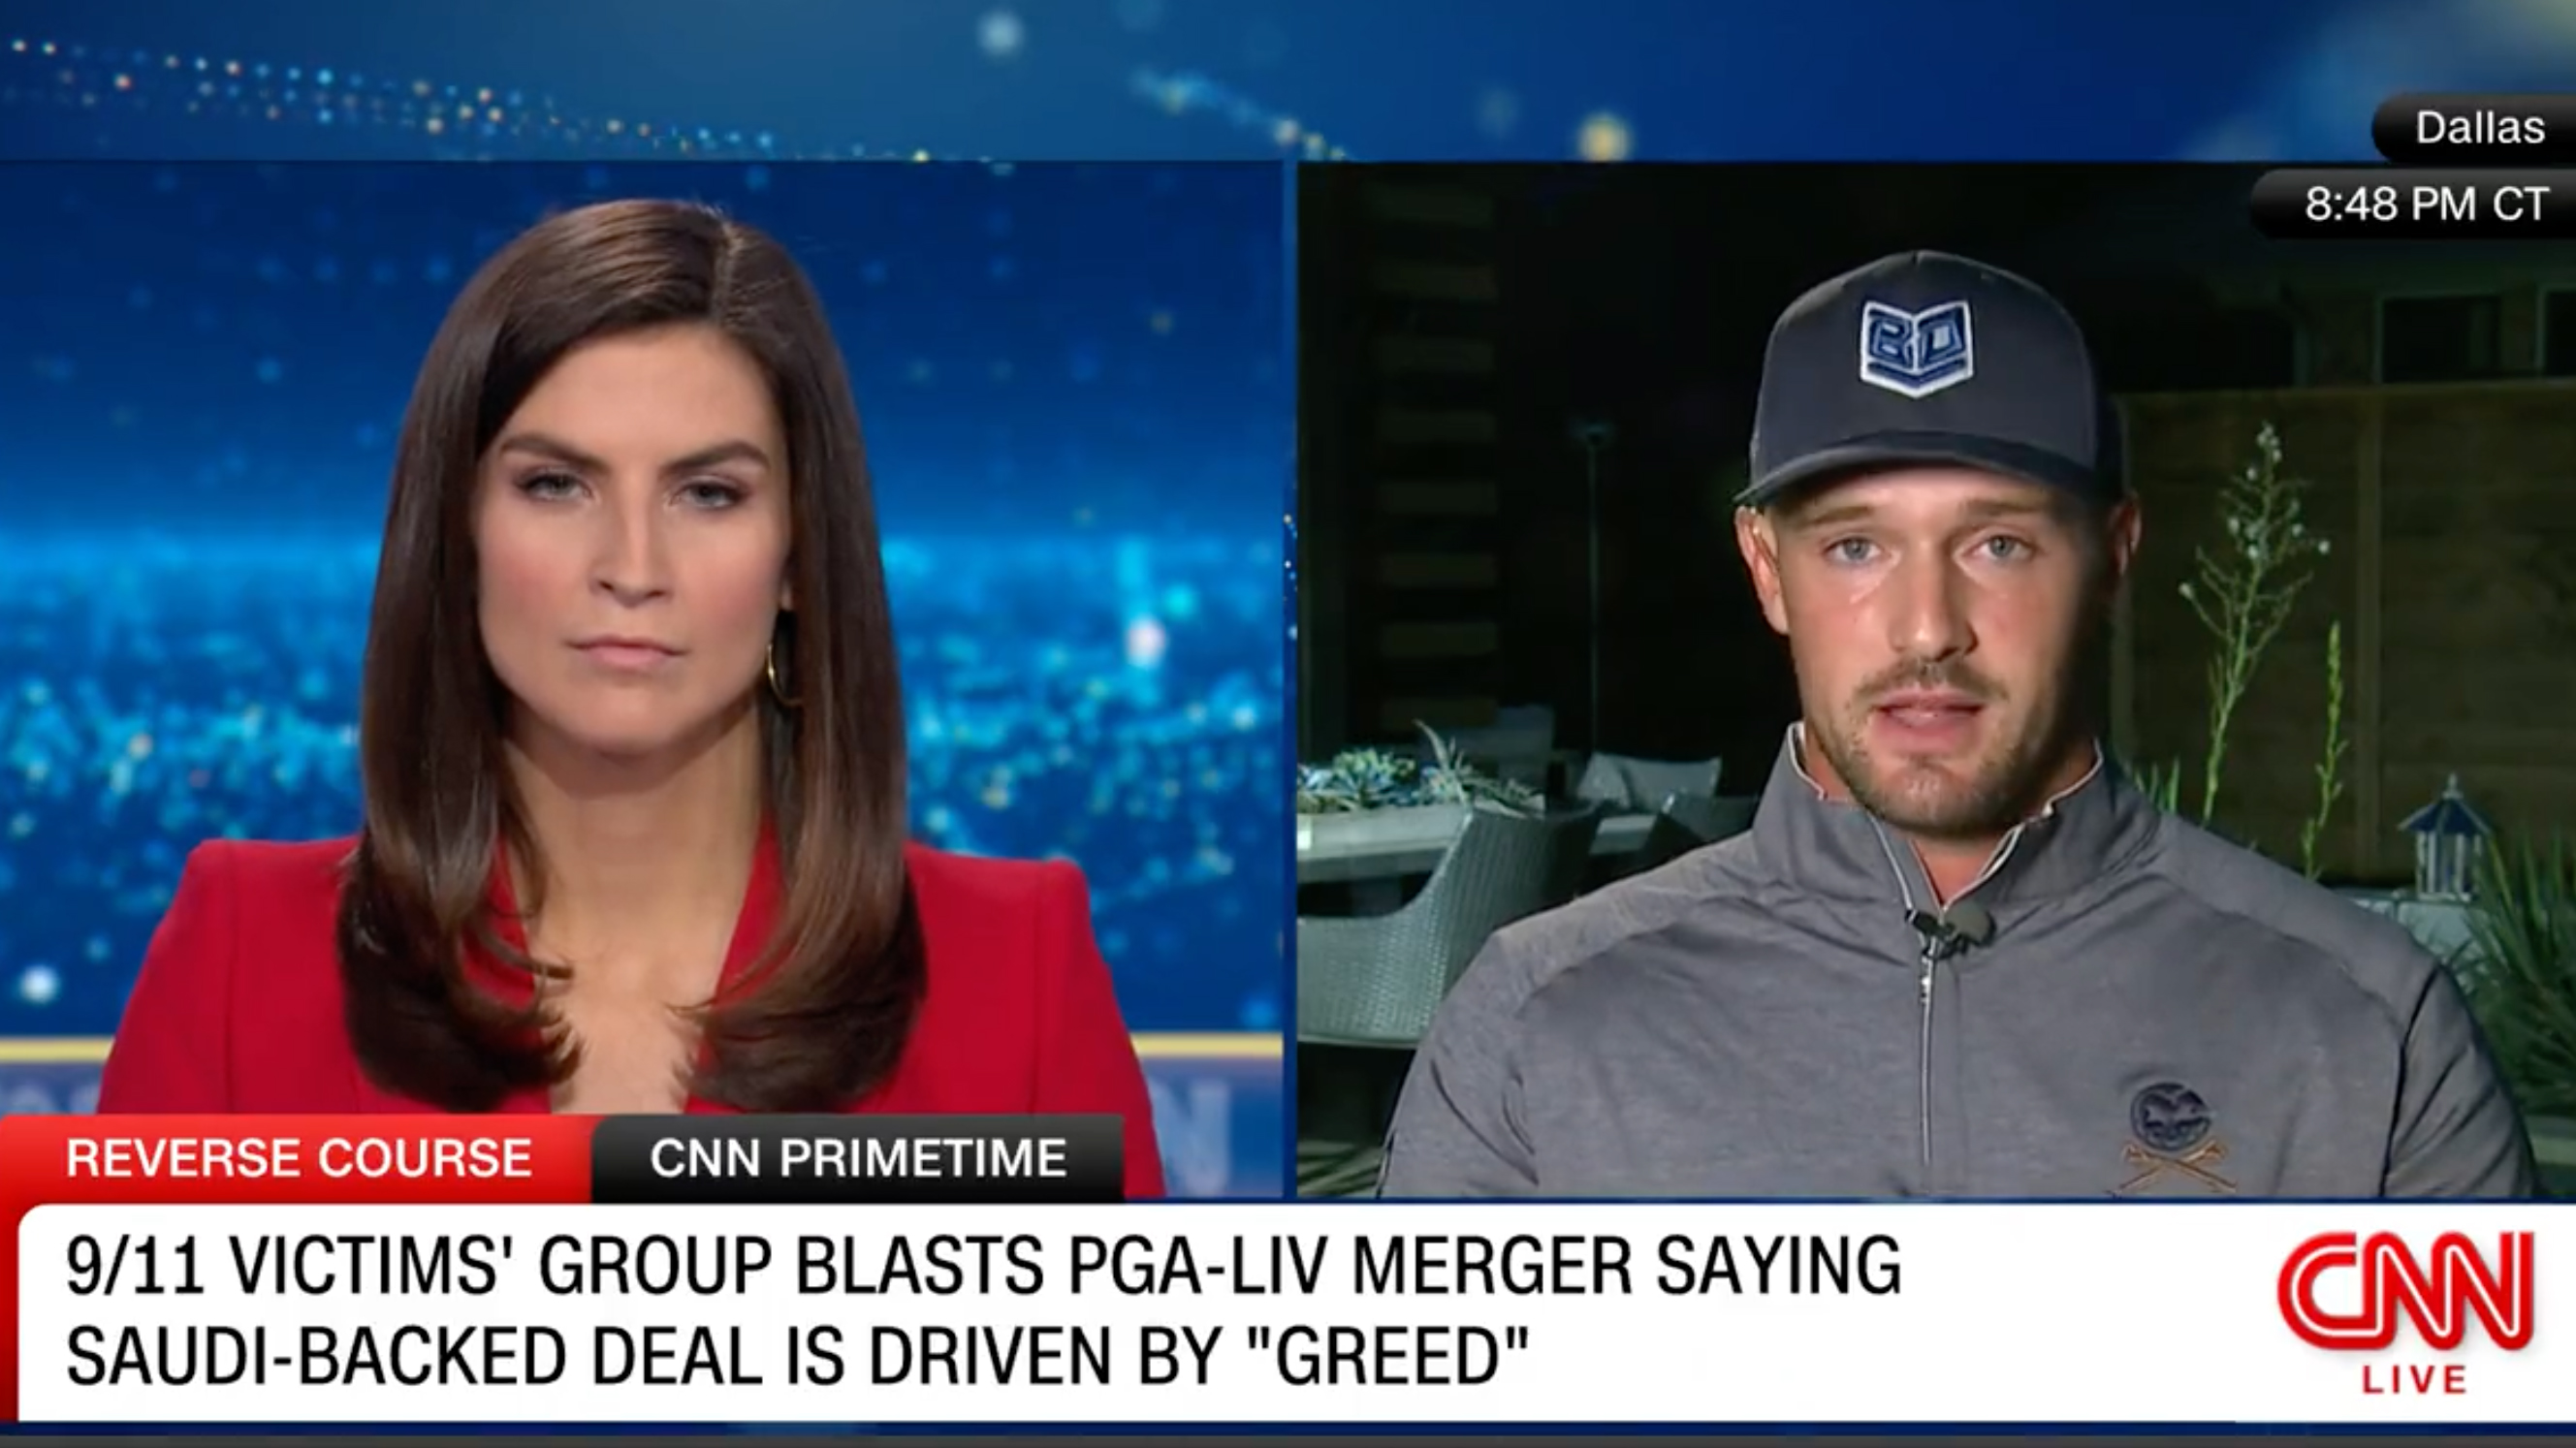 Bryson DeChambeau gives cringeworthy quotes on Saudis during CNN interview 